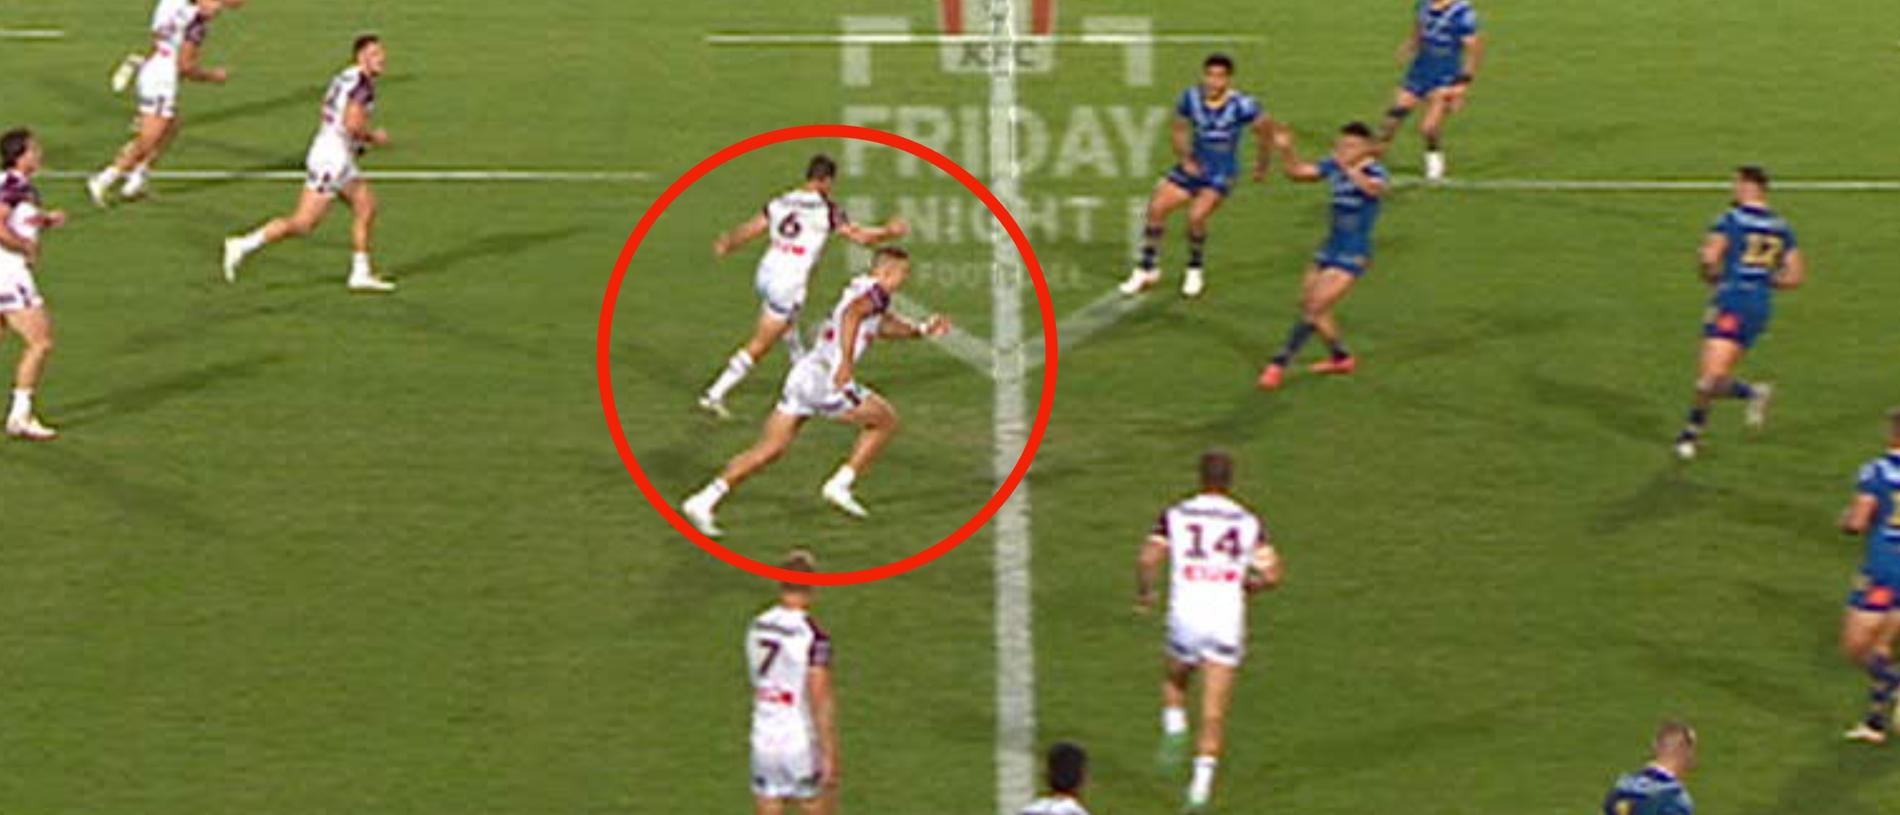 Tom Trbojevic appeared to be offside before a play in which the Eels' Will Penisini got sin binned. Picture: Supplied